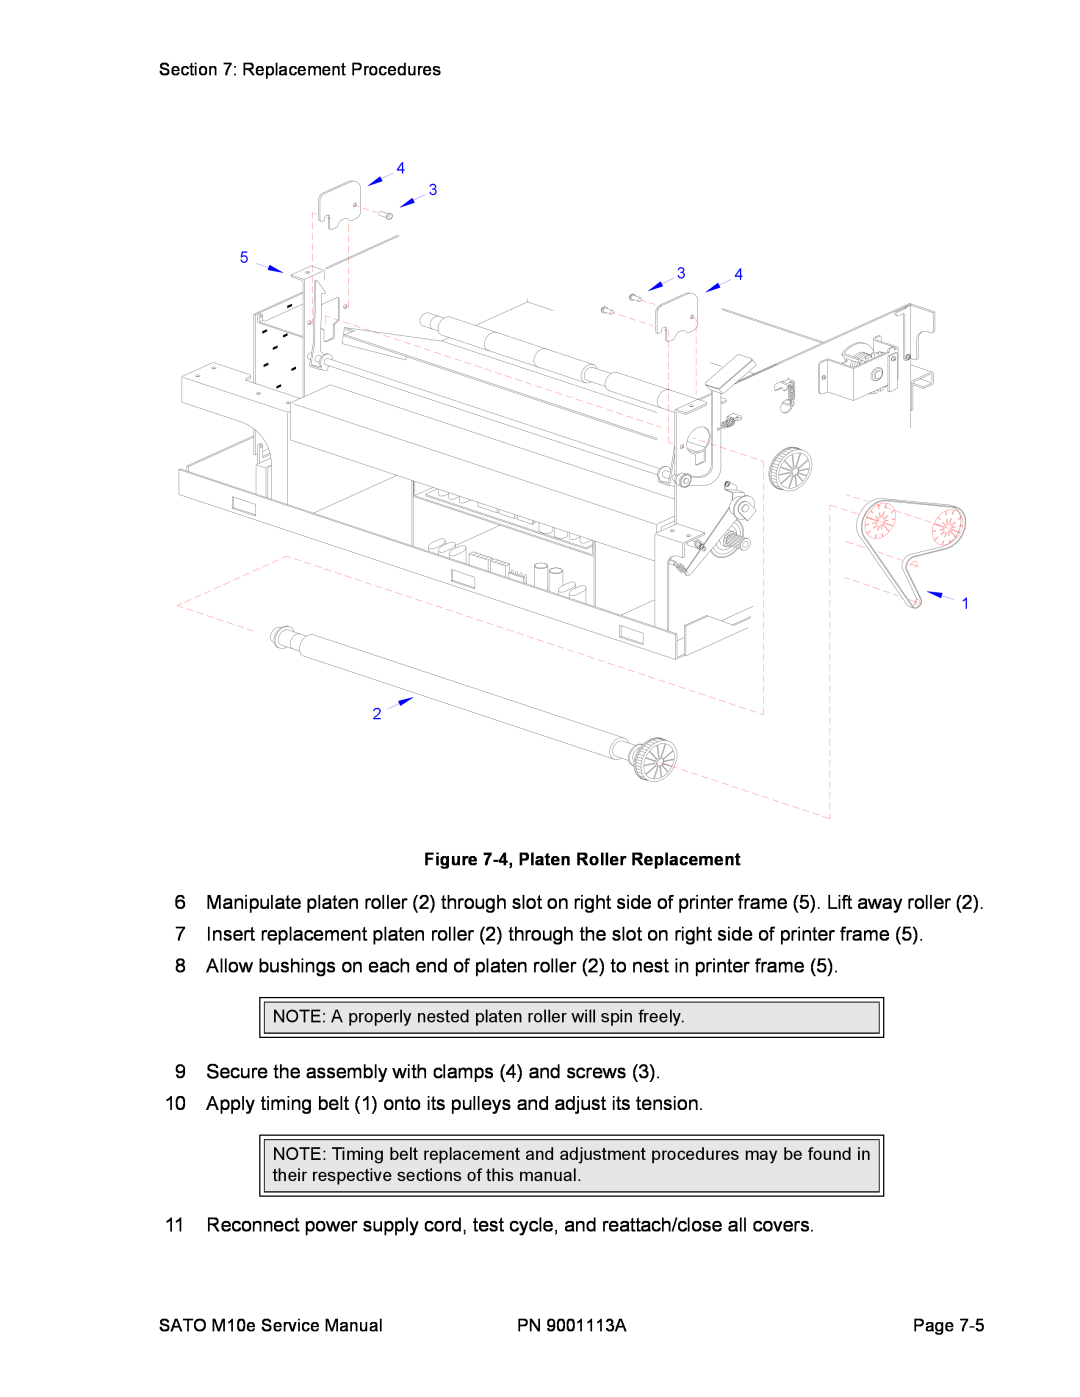 SATO 10e service manual Secure the assembly with clamps 4 and screws 